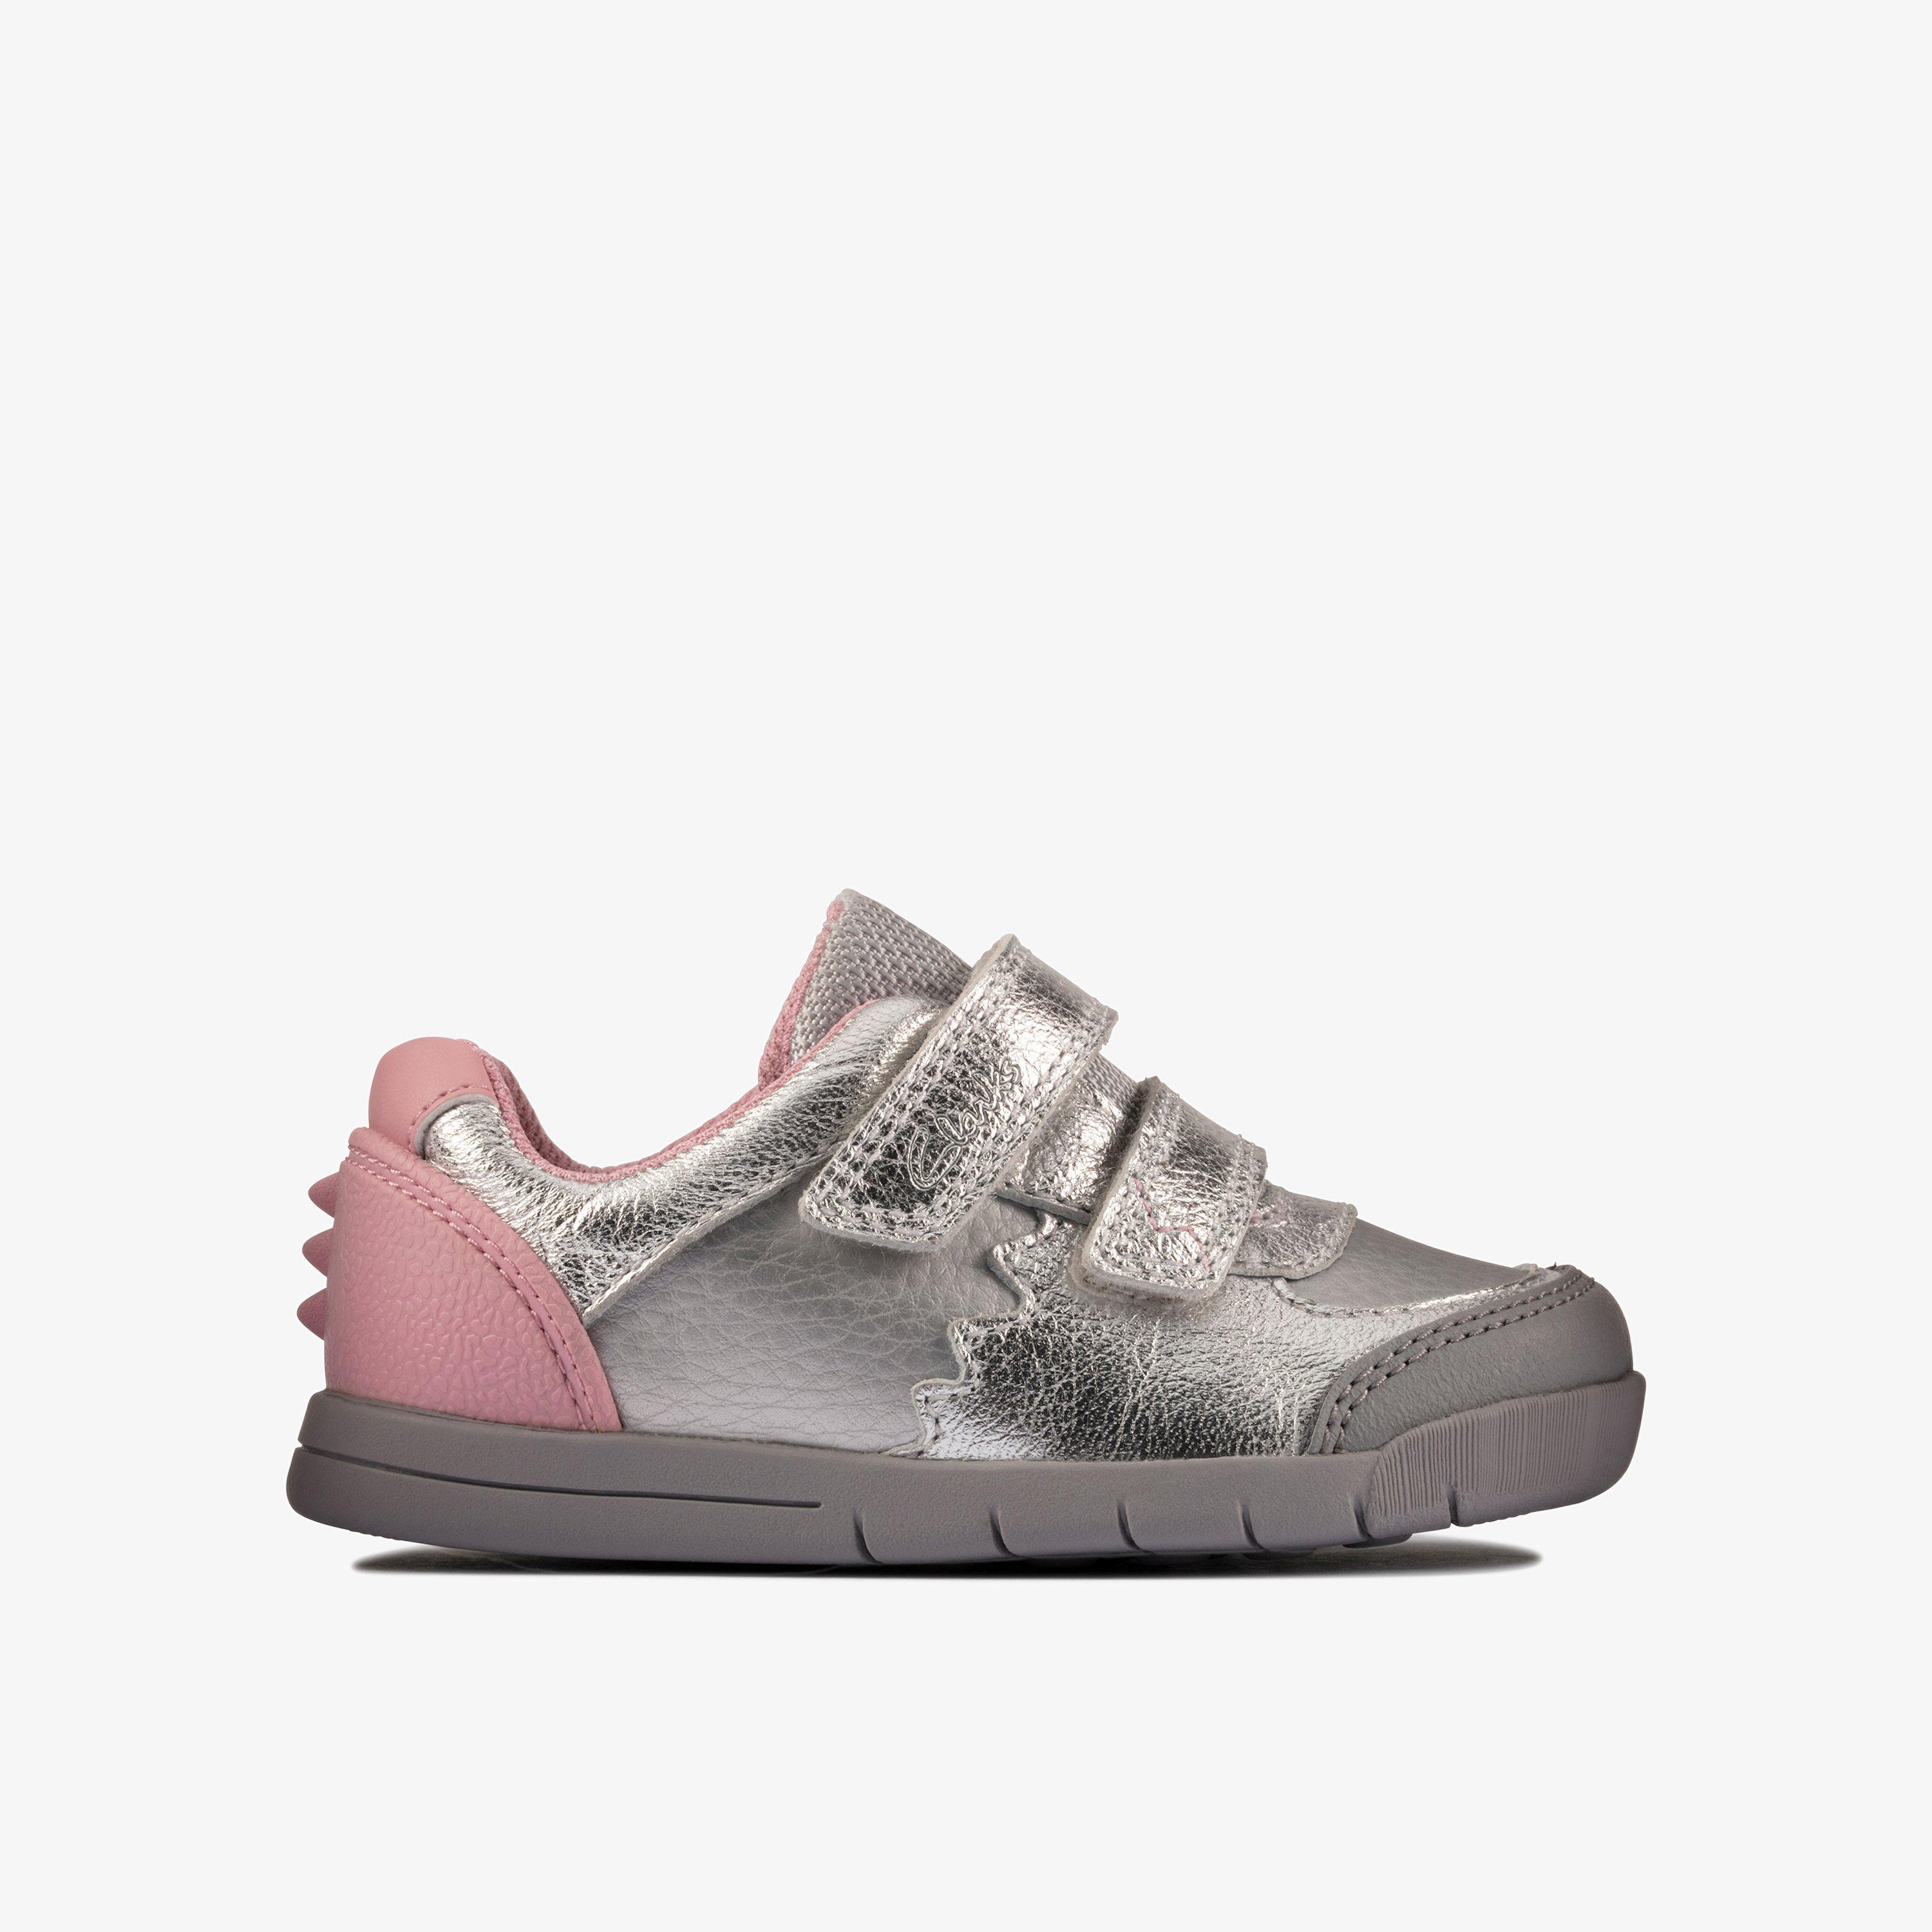 GIRLS Rex Quest Toddler Silver Leather Shoes | Clarks Outlet